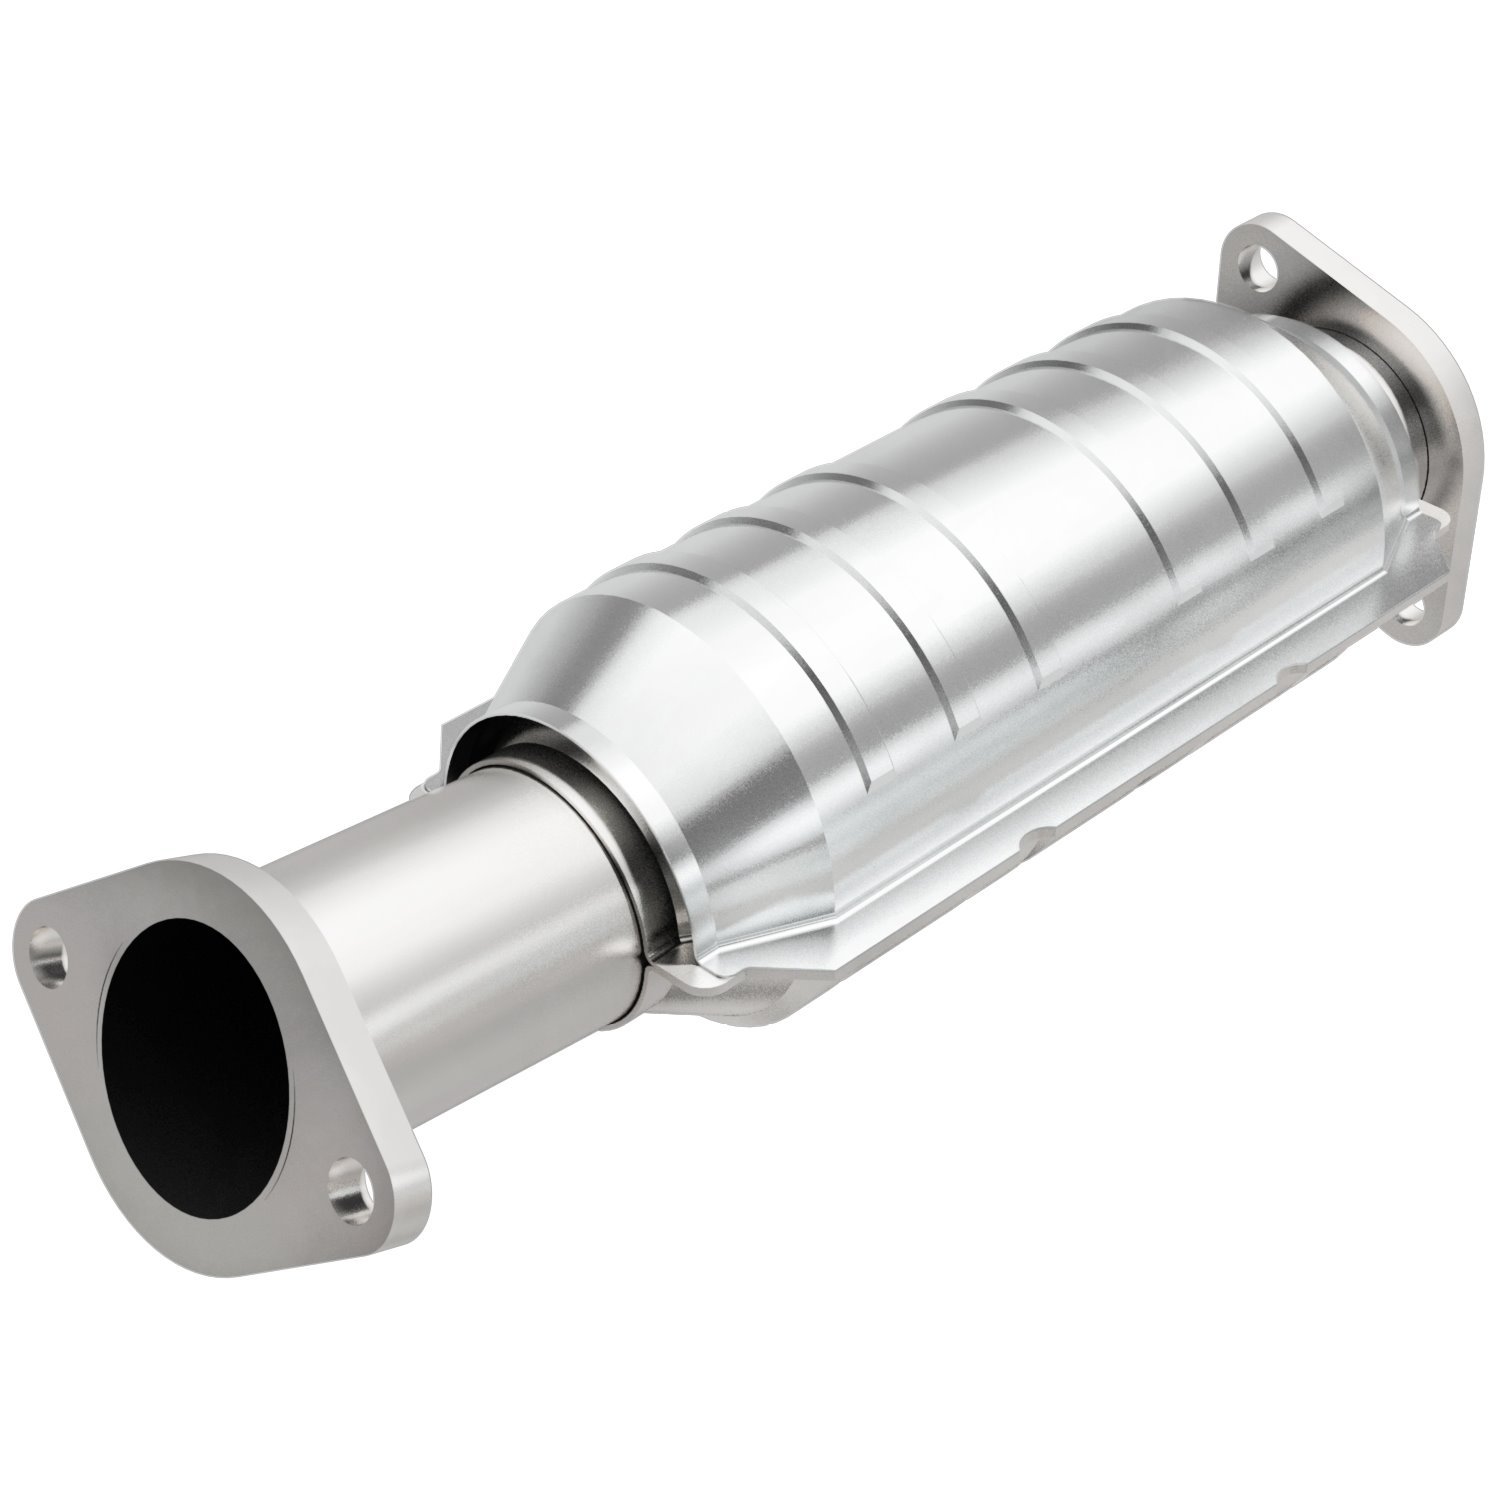 HM Grade Federal / EPA Compliant Direct-Fit Catalytic Converter 23010